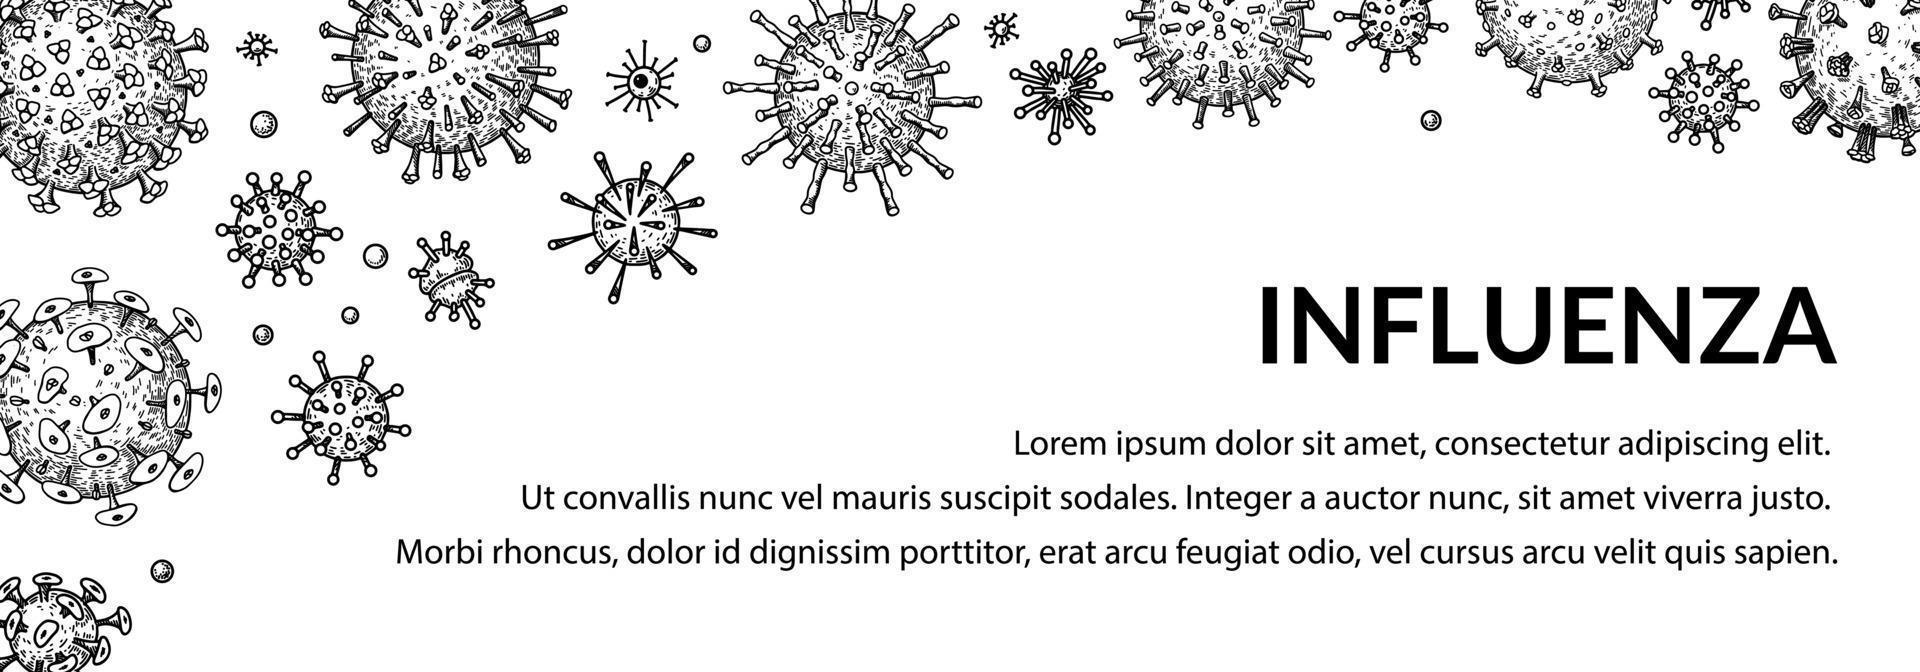 Virus horizontal background in sketch style. Hand drawn bacteria, germ, microorganism. Microbiology scientific design. Vector illustration in sketch style